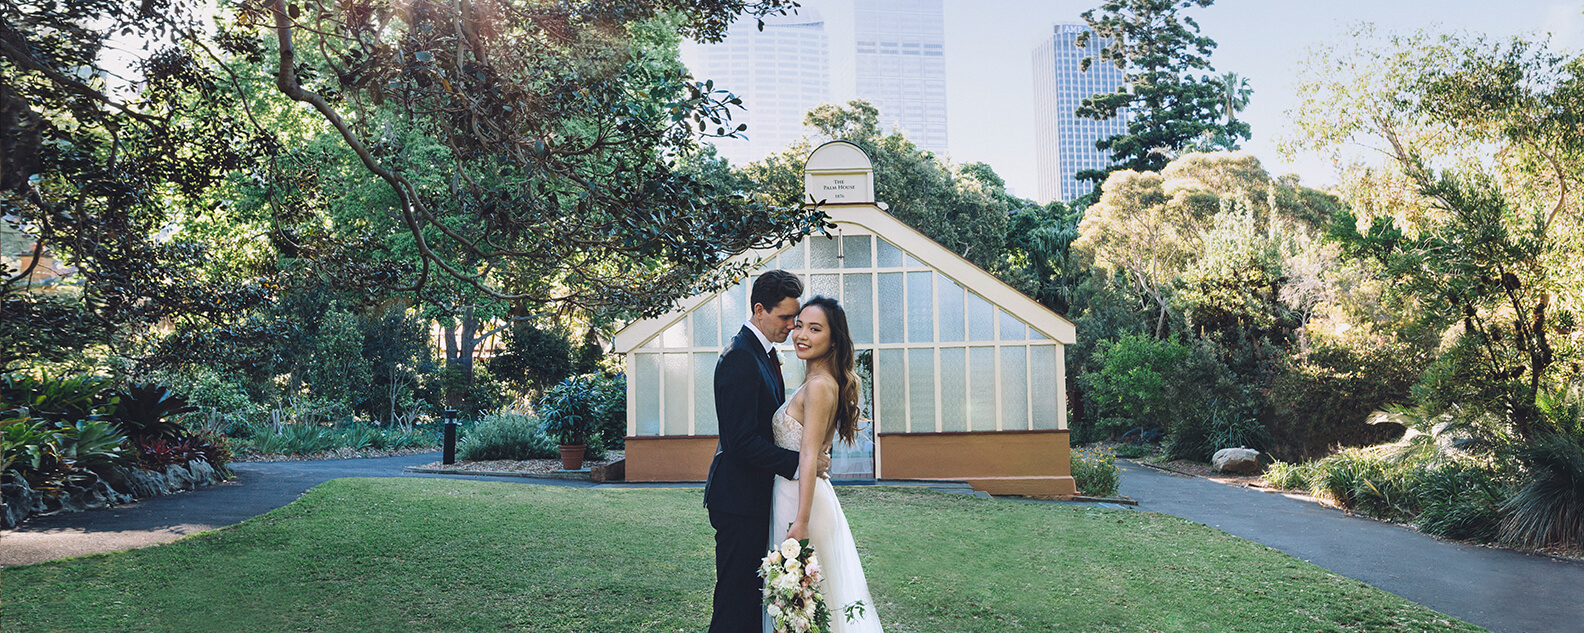 Bride and groom cuddle in front of historic, shabby chic green house wedding venue